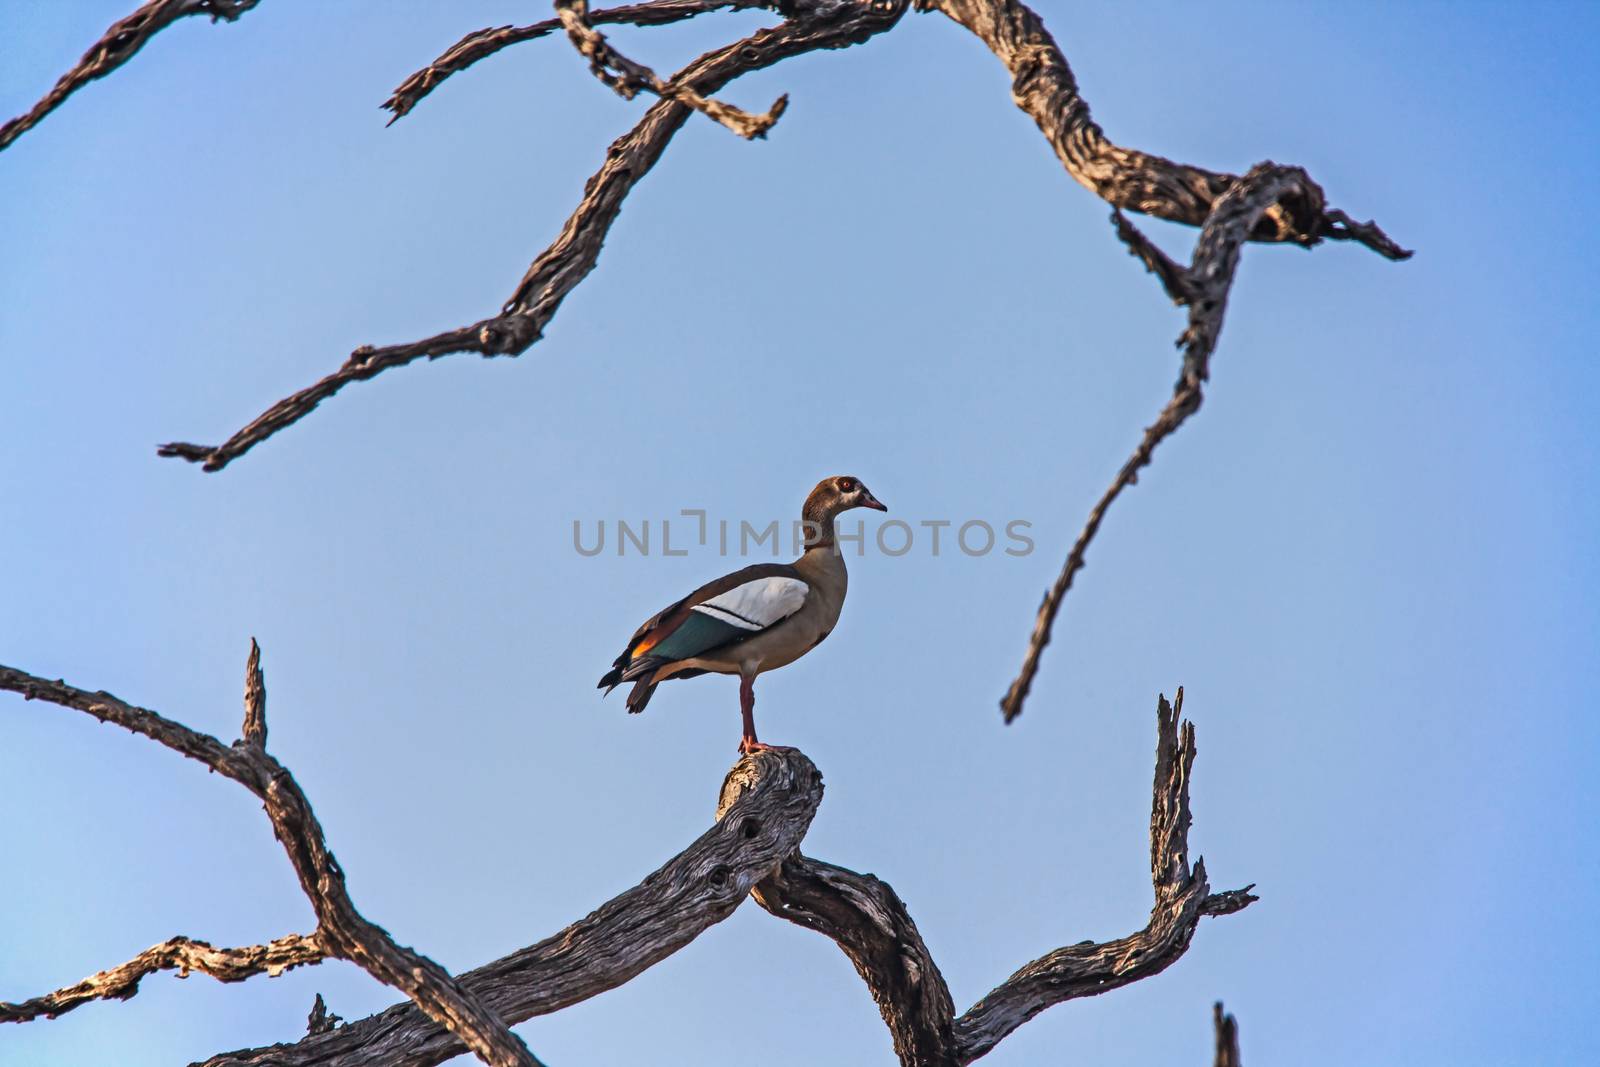 Lone Egyptian Goose in a dead tree photographed in Kruger National Park. South Africa.